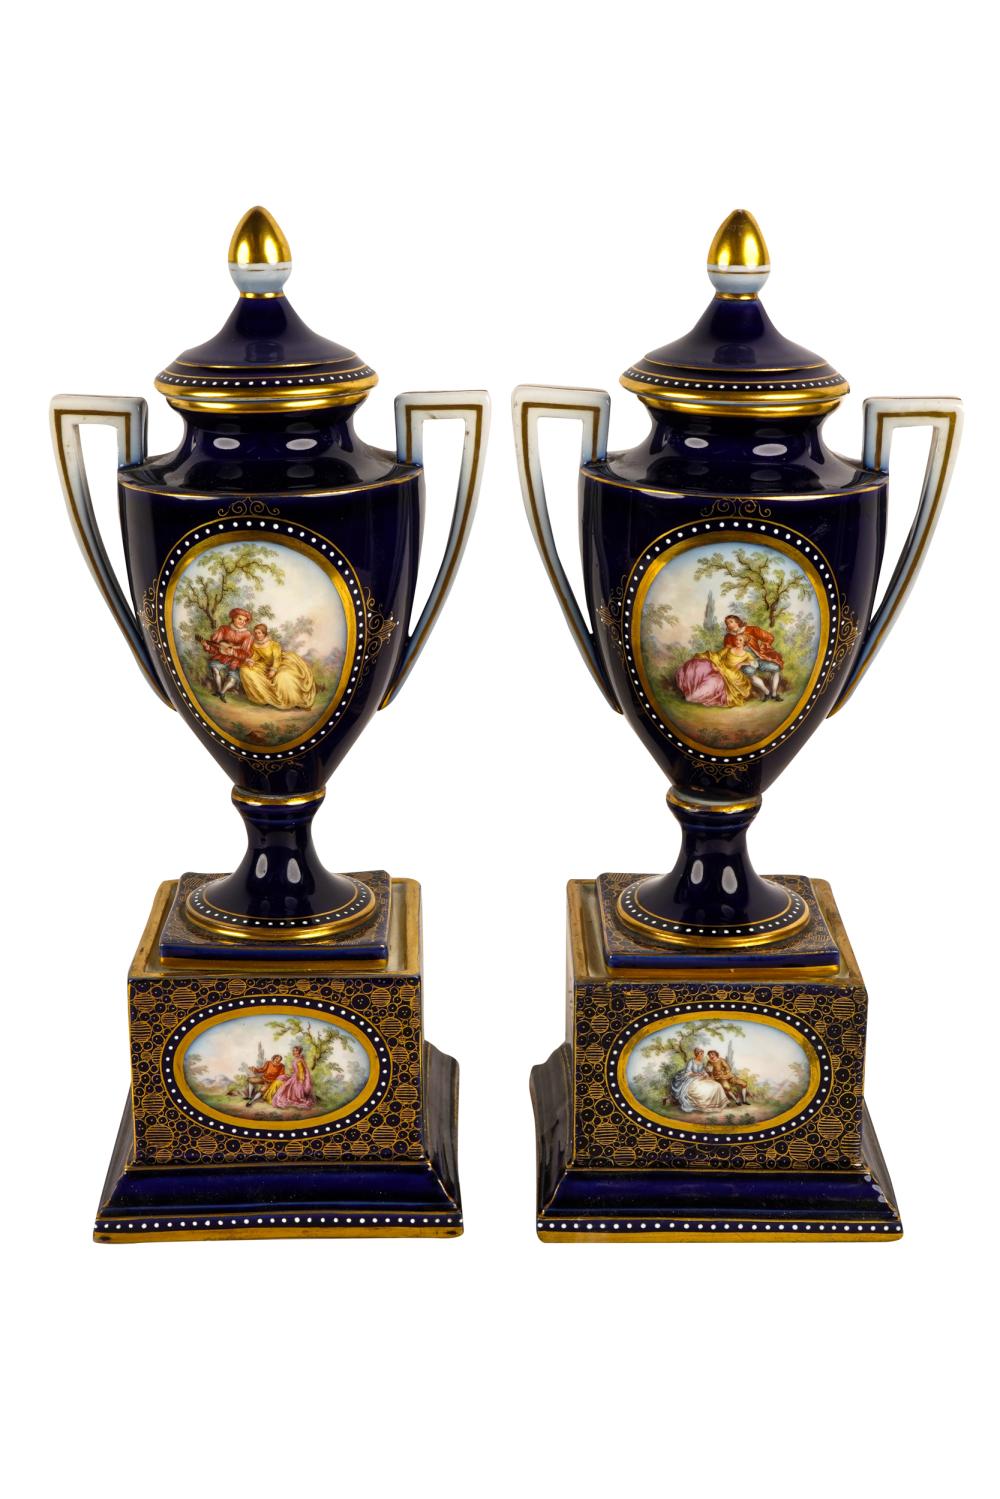 PAIR OF PORCELAIN COVERED GARNITURESwith